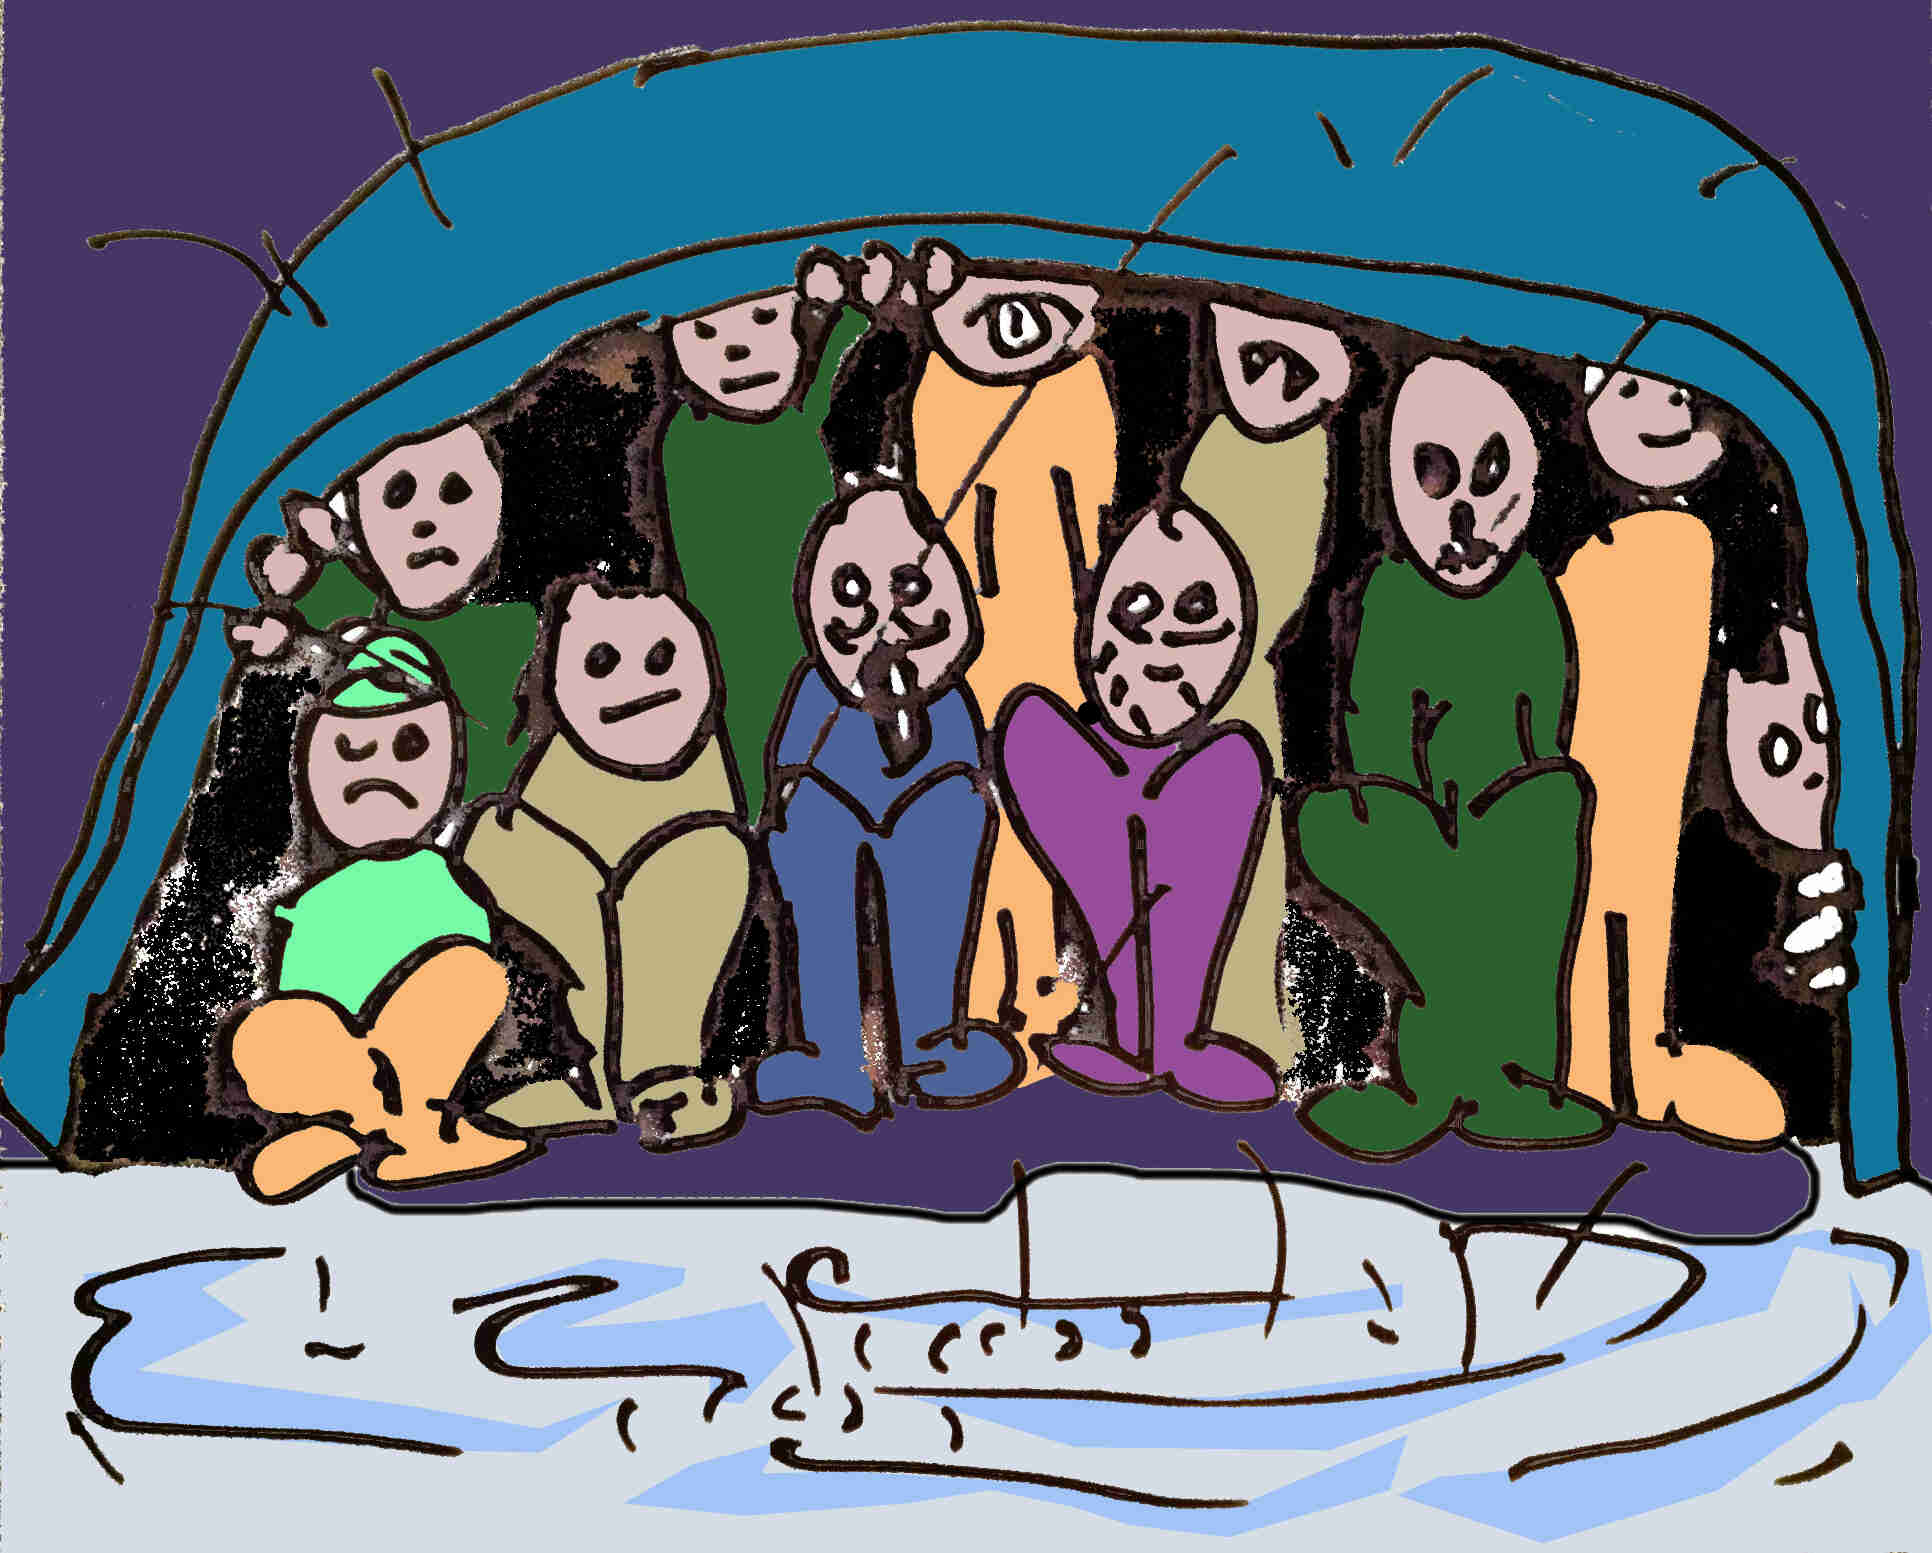 Color cartoon illustration of a group of people, sitting and standing under a blue tarp, behind a water puddle